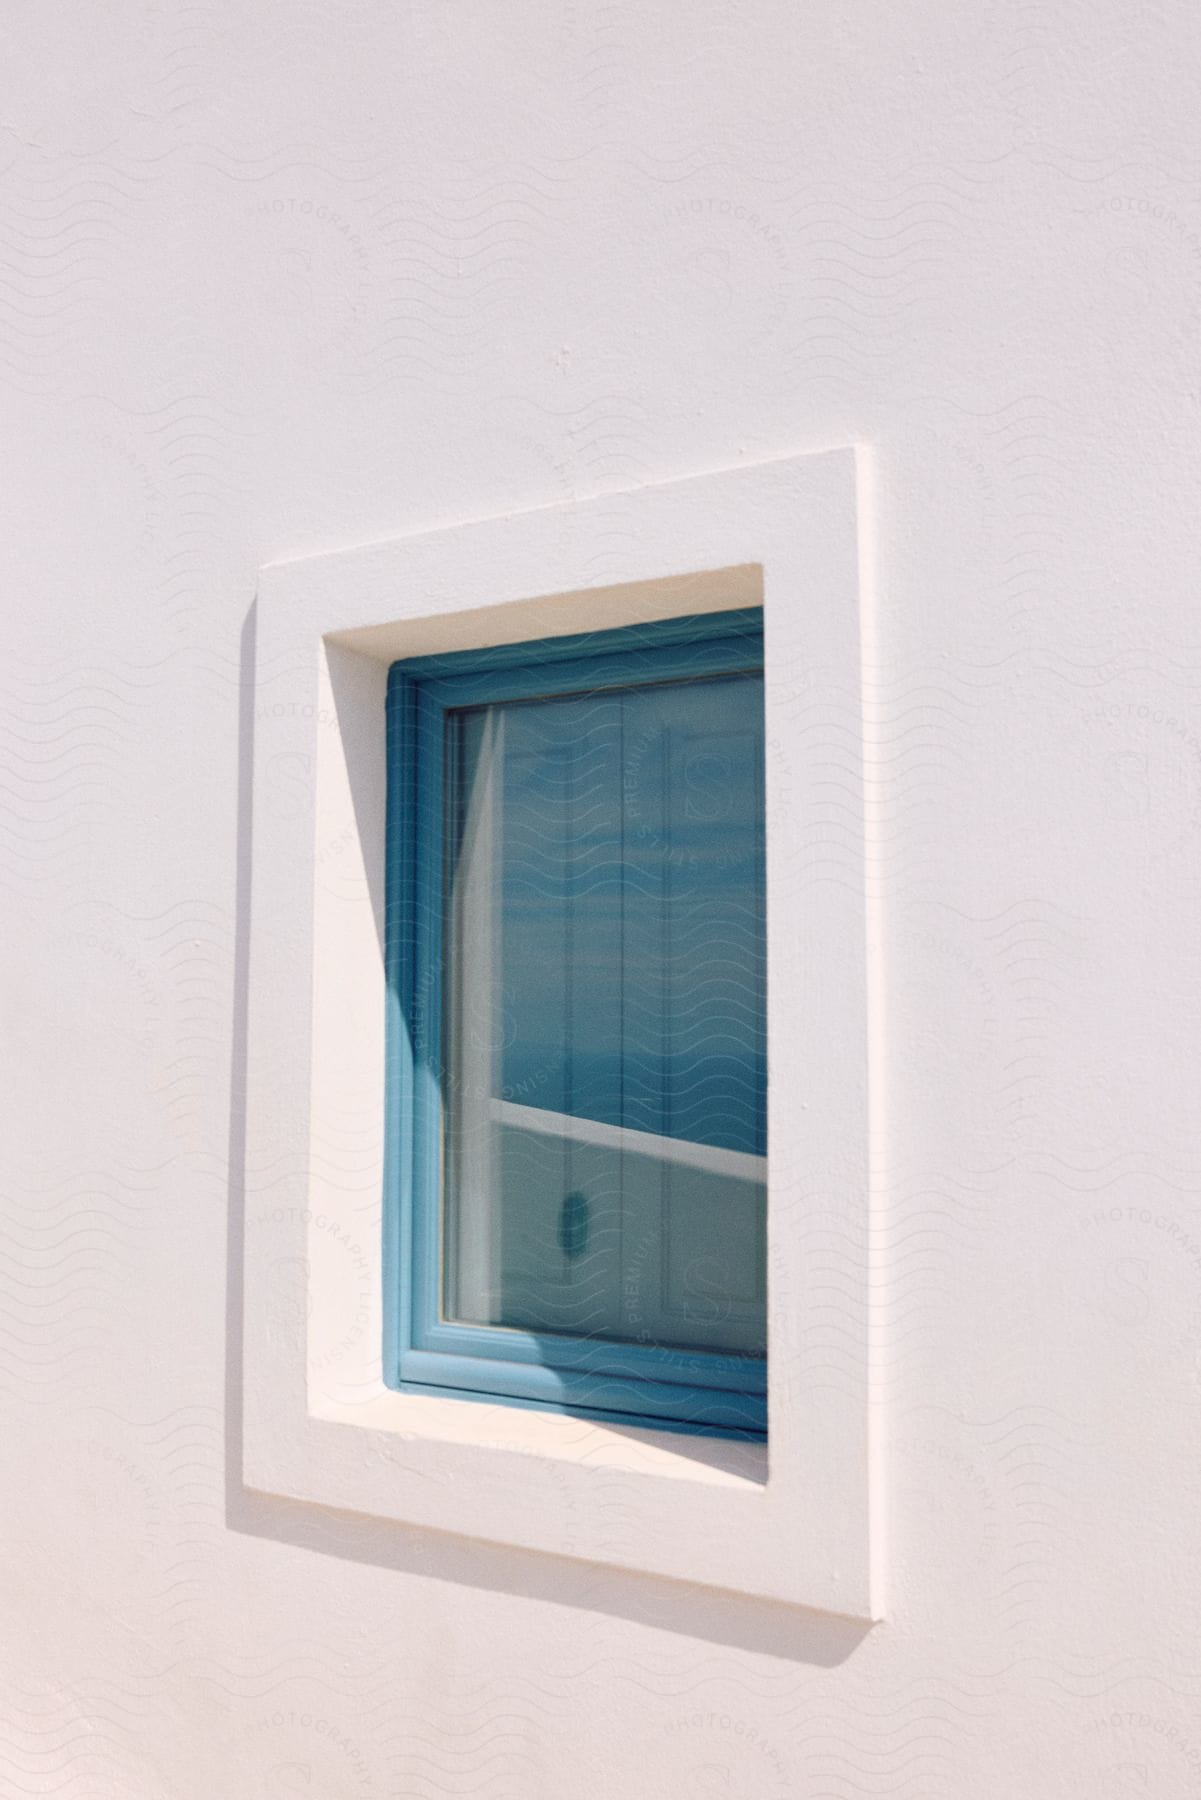 A white, three-dimensional square window frame with a blue window set into a white wall.